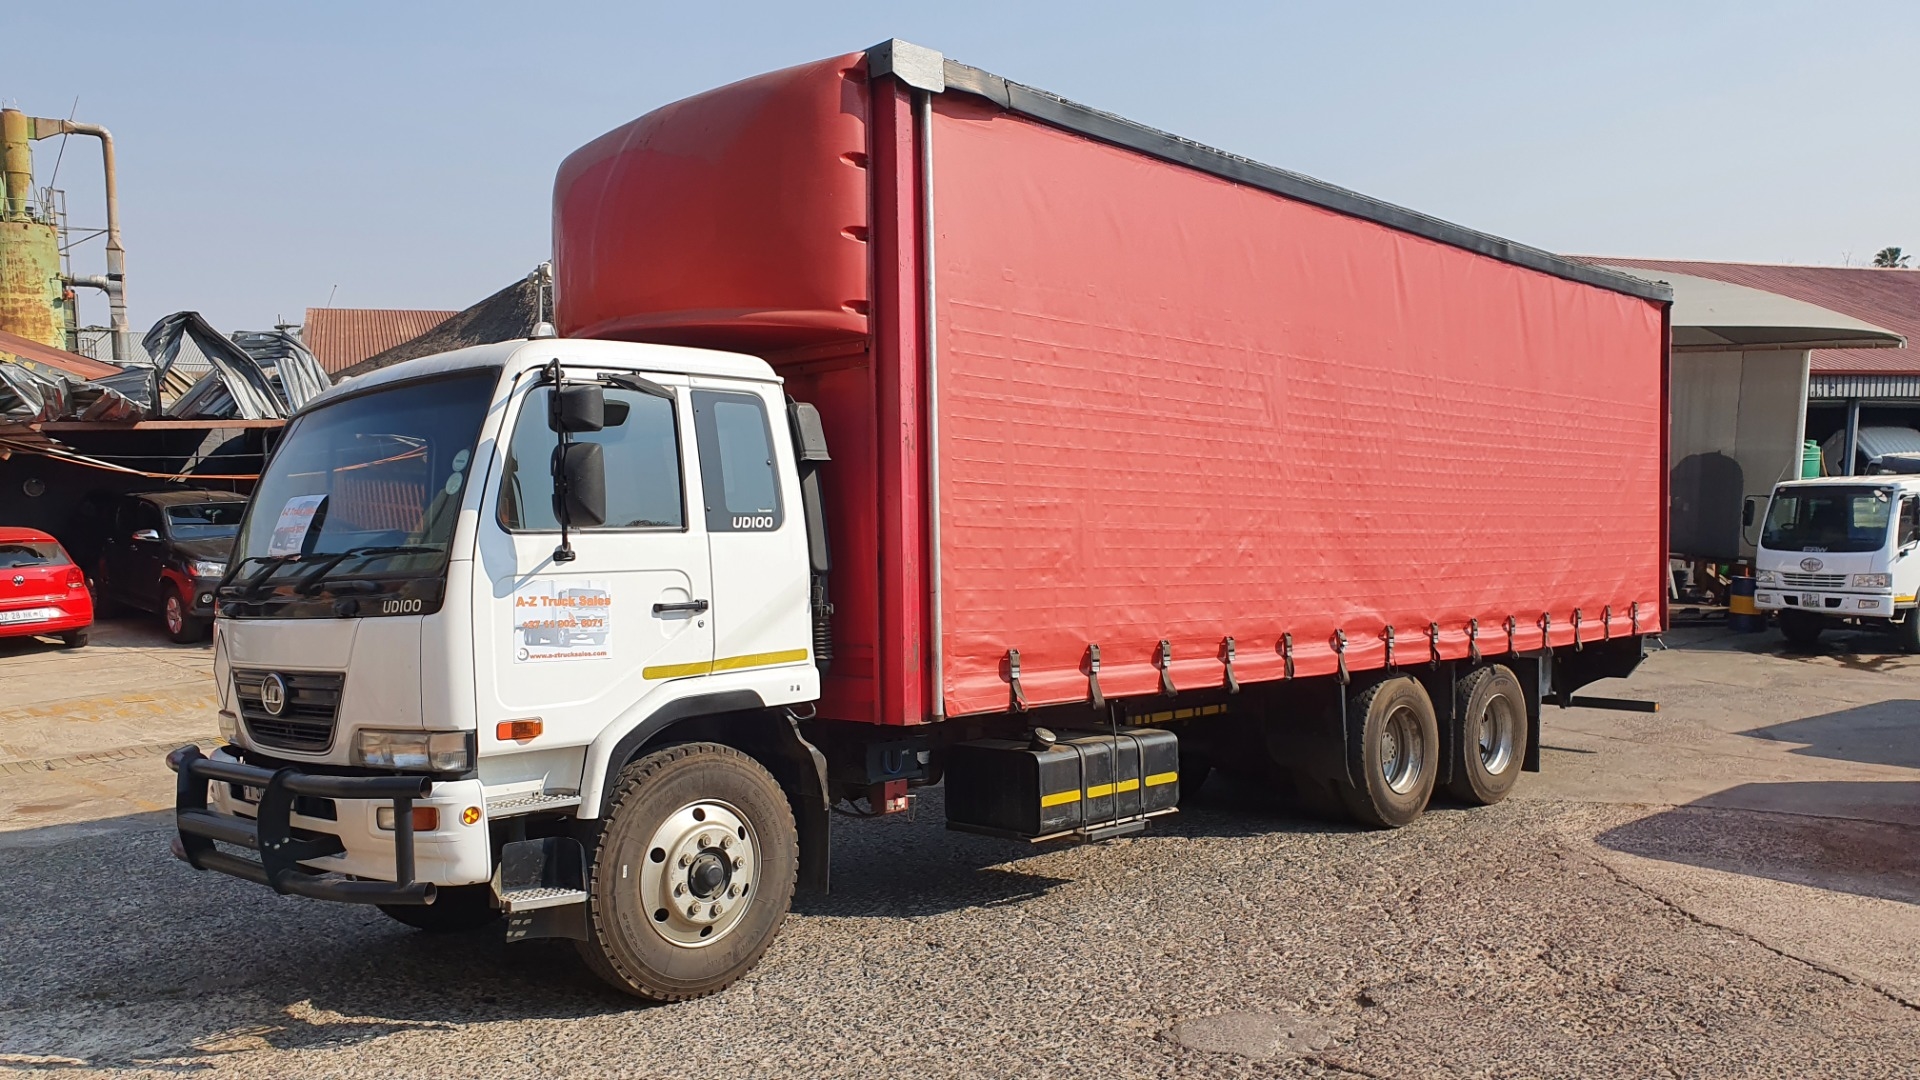 Used 2014 UD100 16 TON for sale in Gauteng | R 725,000